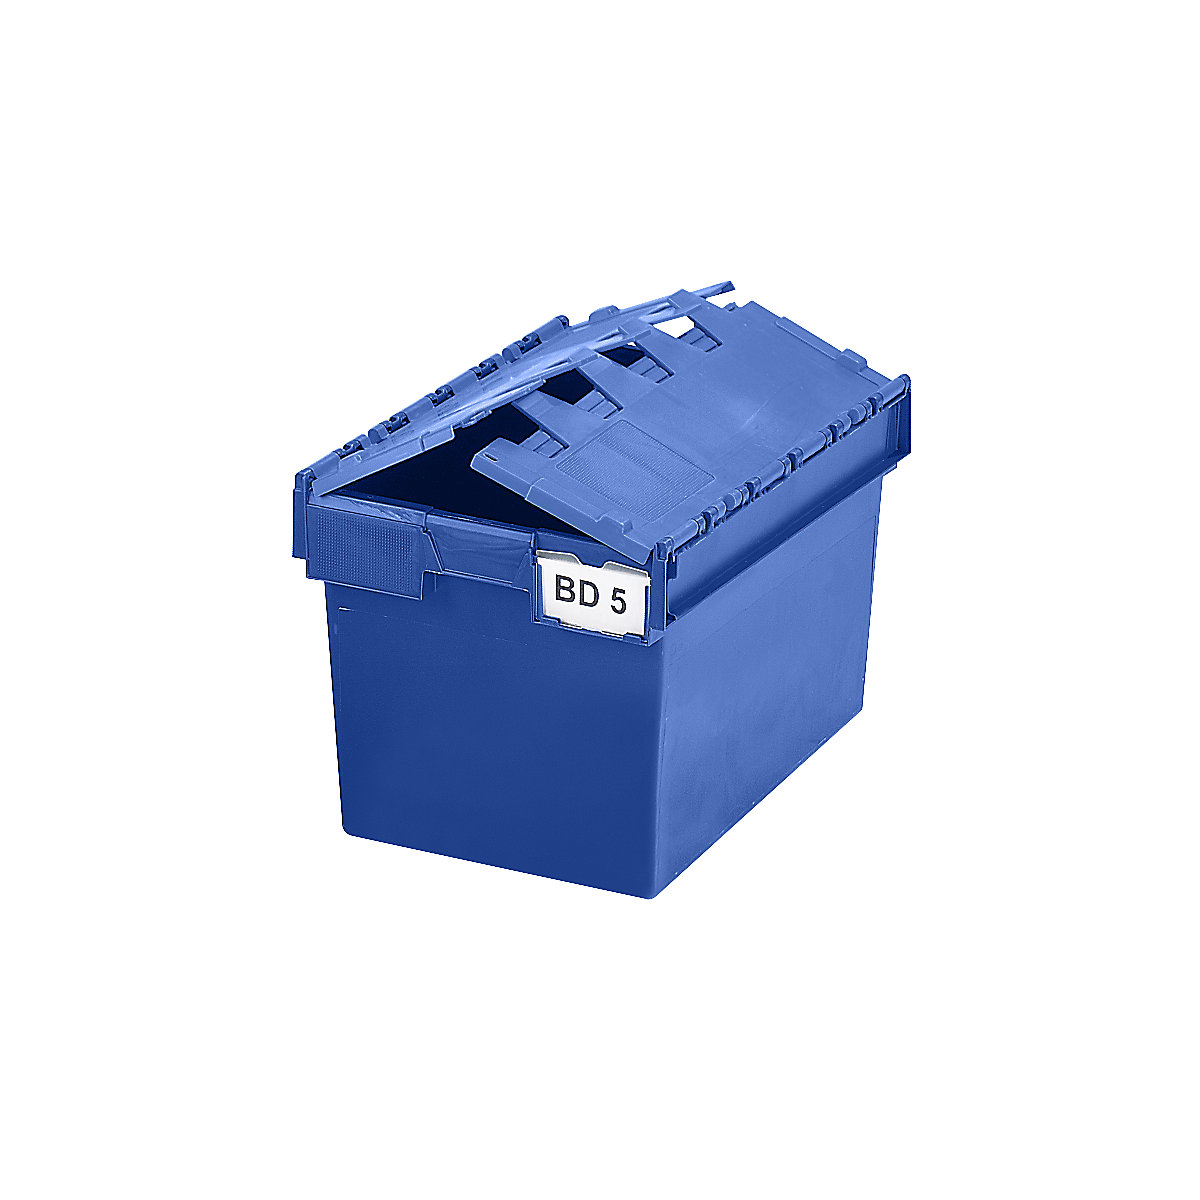 KAIMAN reusable stacking container, capacity 64 litres, LxWxH 600 x 400 x 365 mm, blue, 10+ items